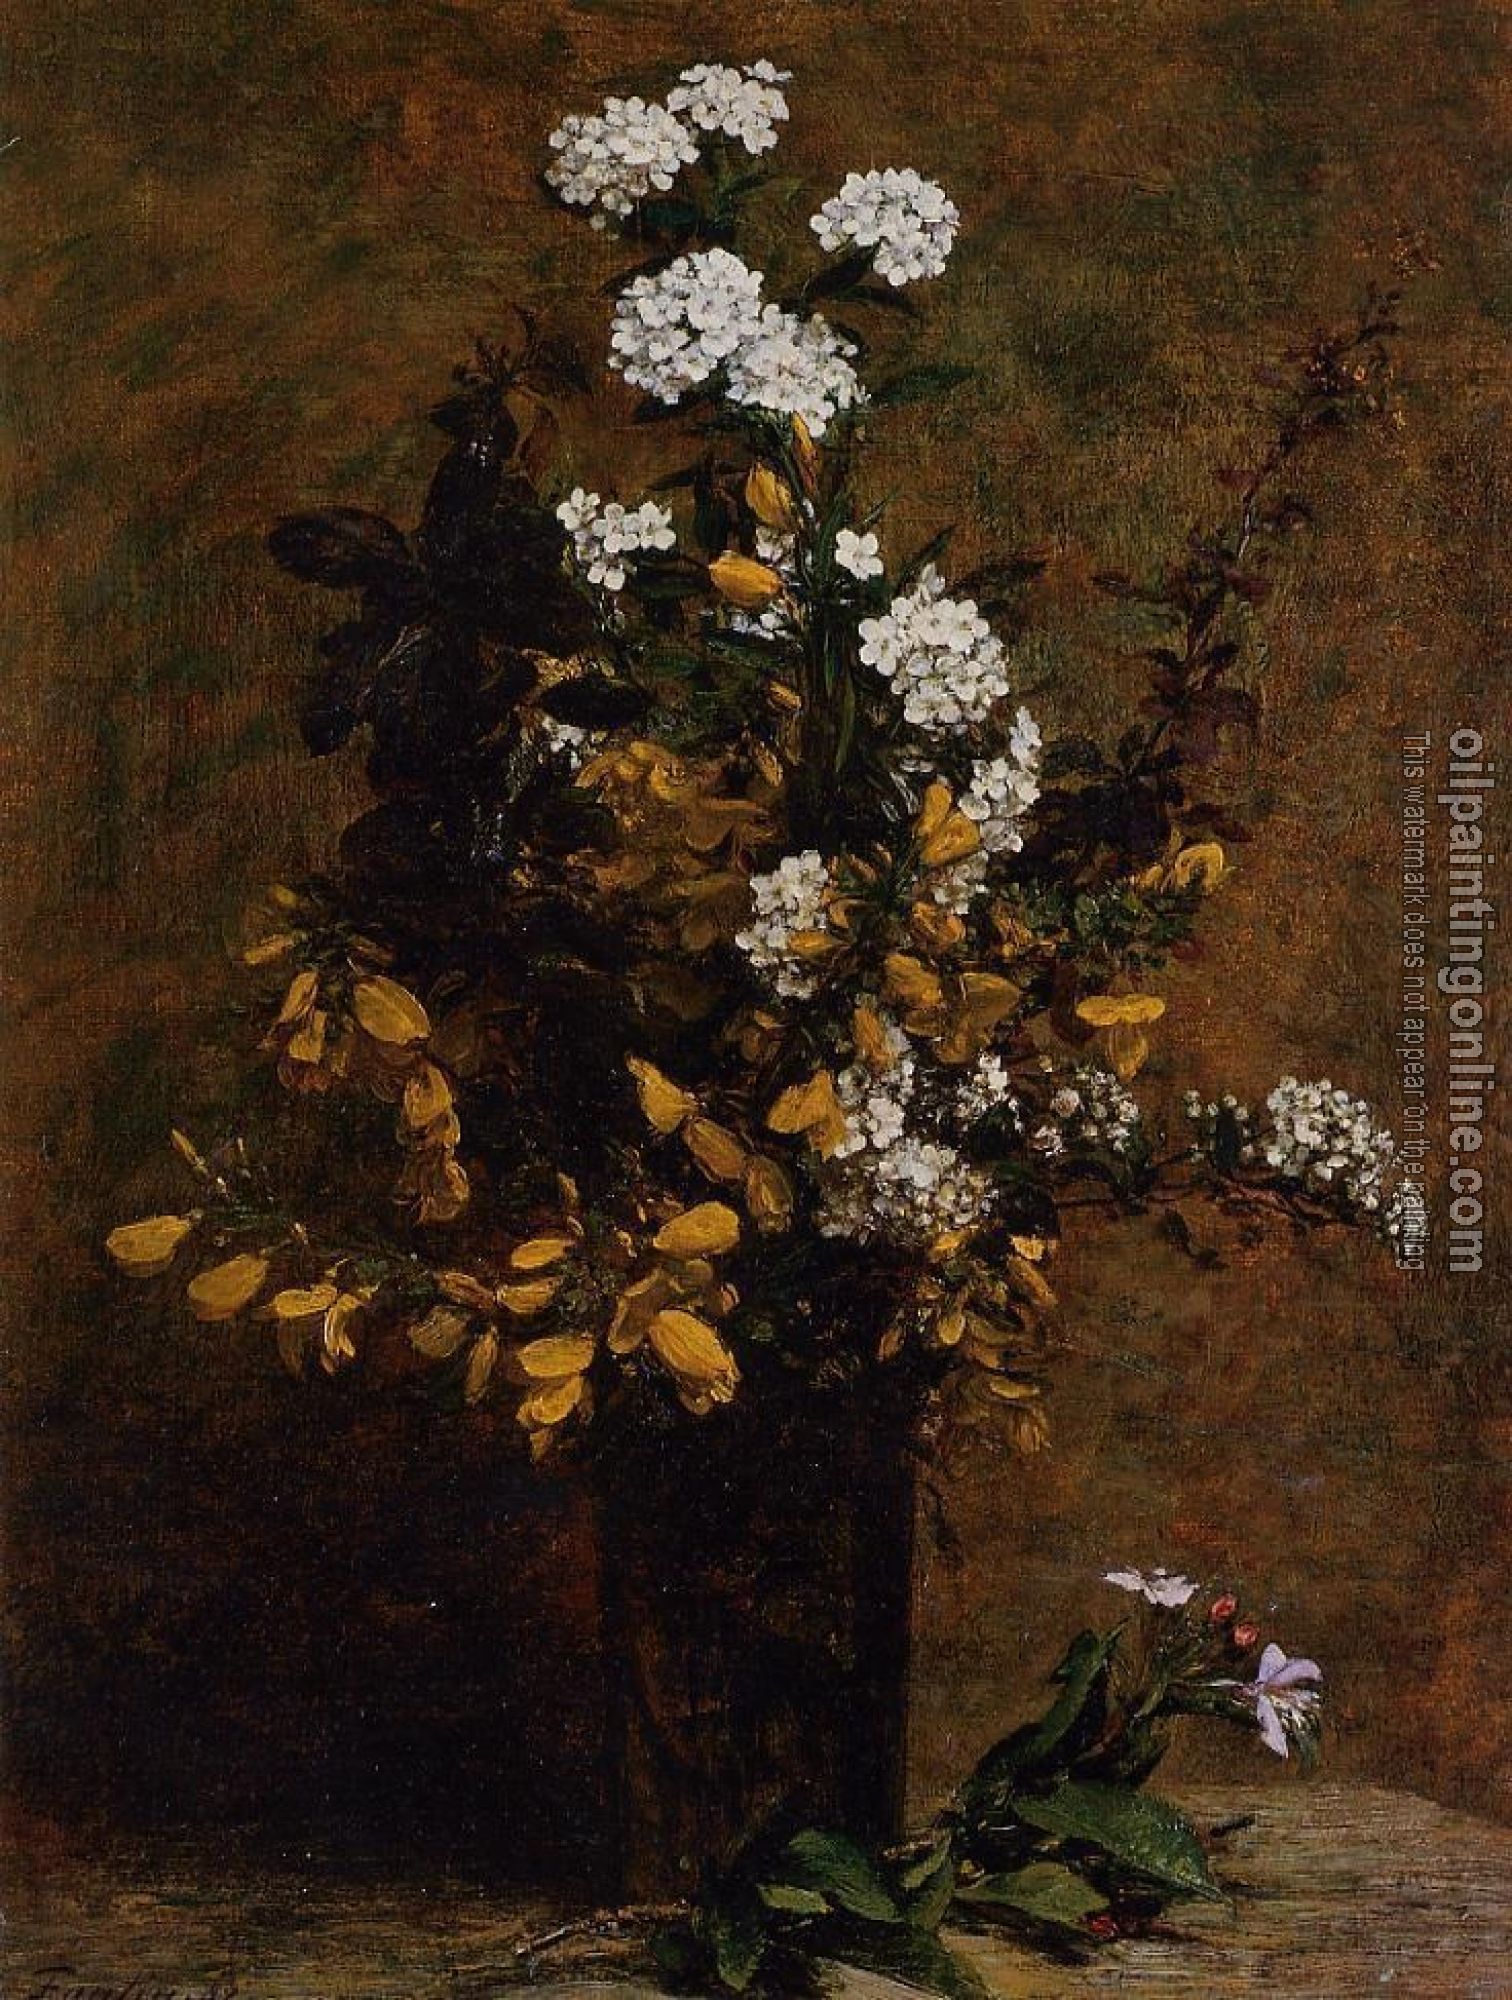 Fantin-Latour, Henri - Broom and Other Spring Flowers in a Vase